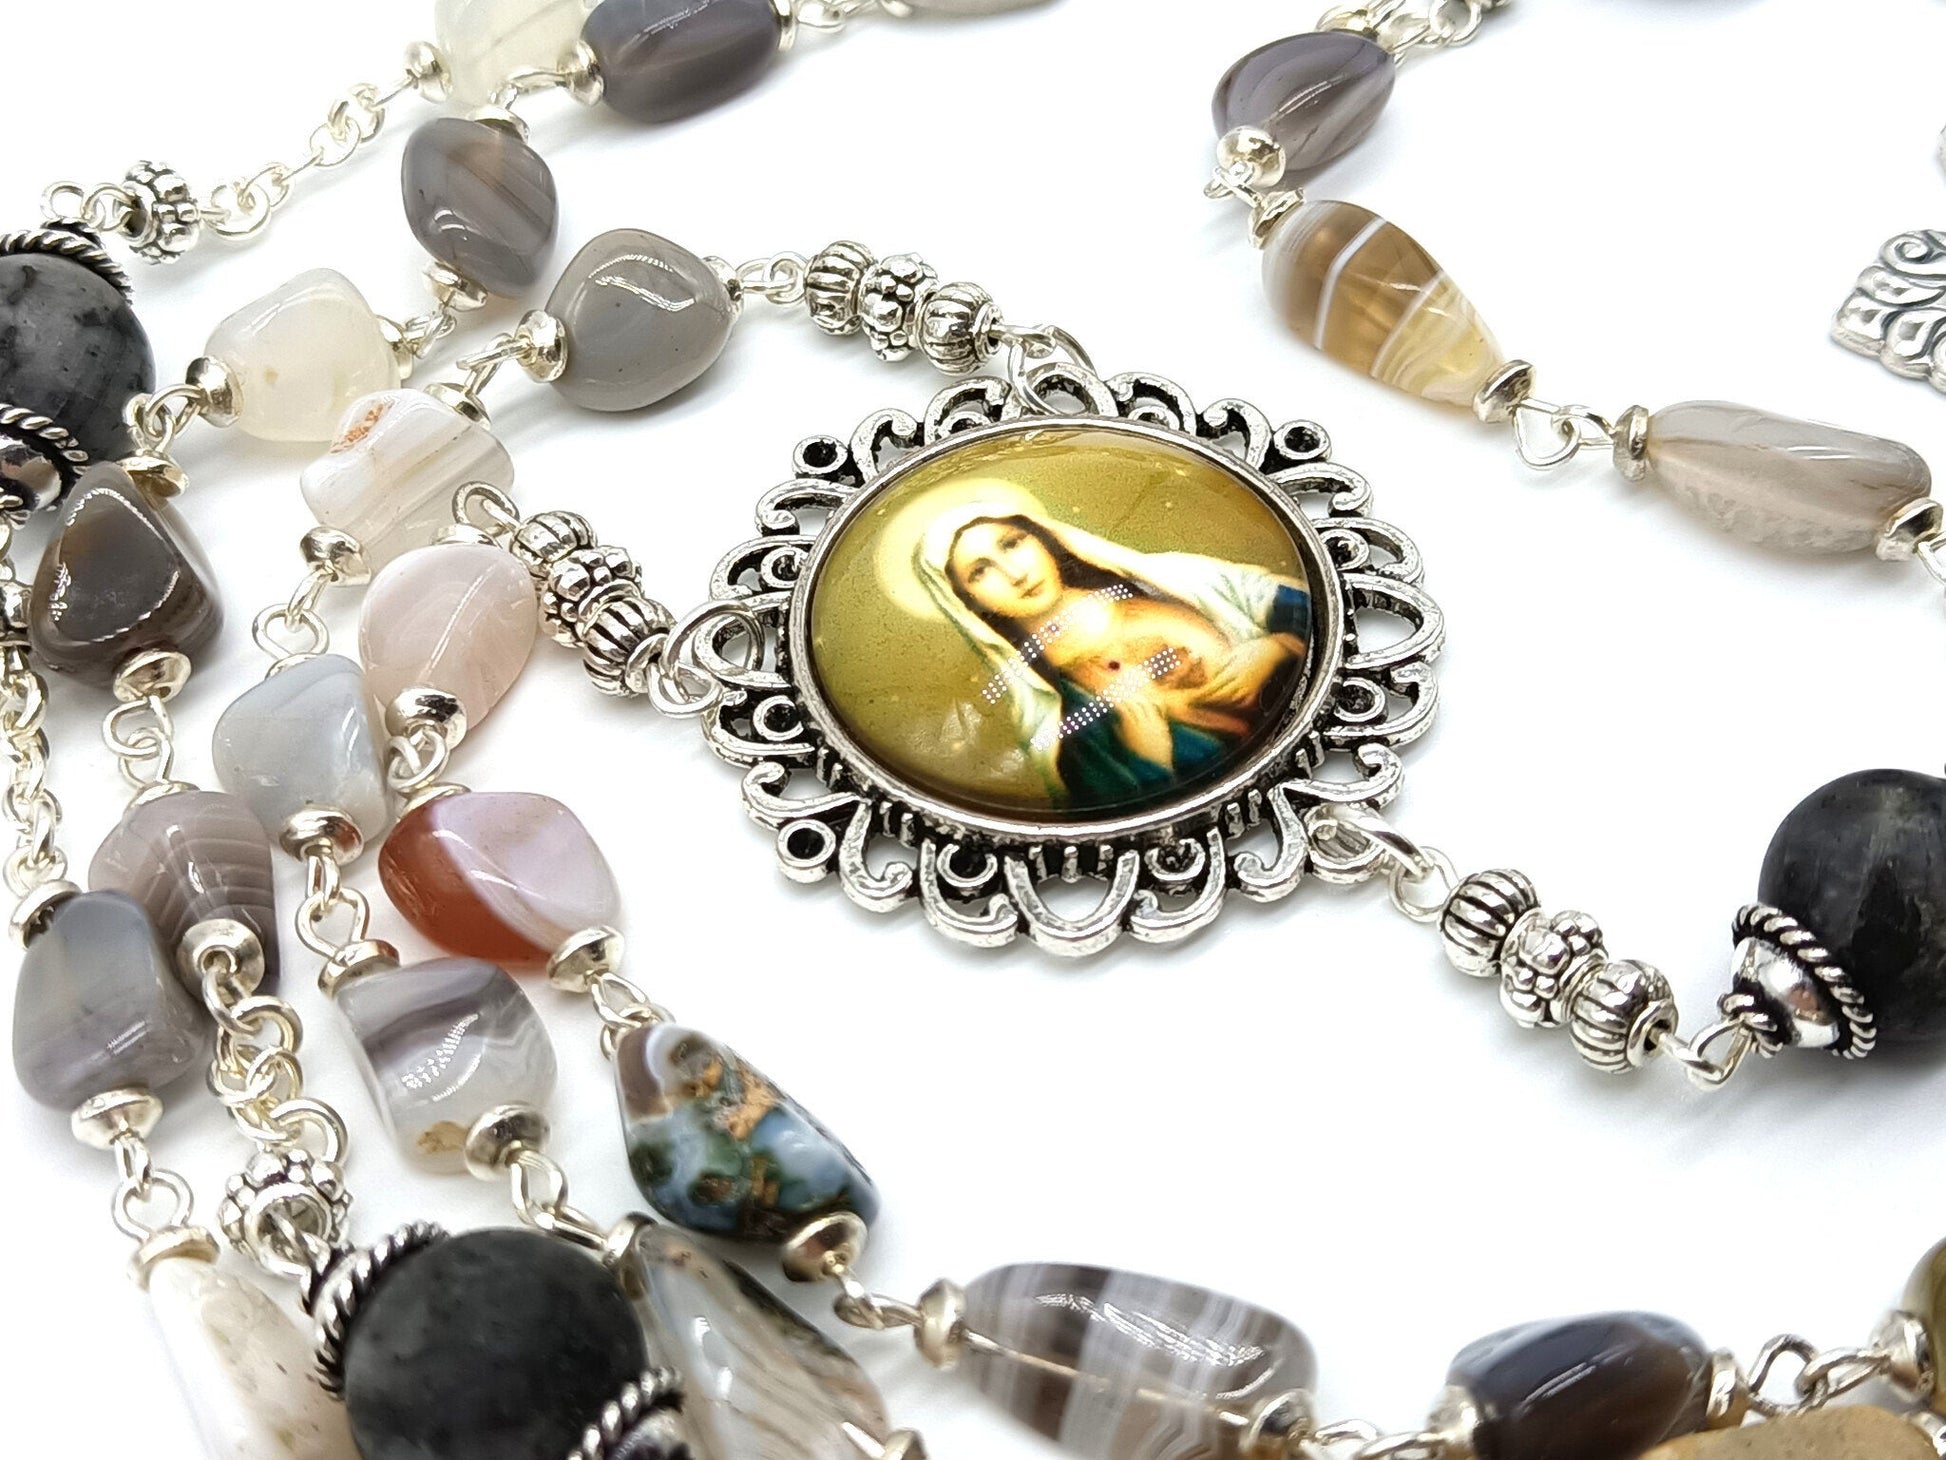 Agate gemstone unique rosary beads with silver pardon crucifix and Immaculate heart picture centre medal.